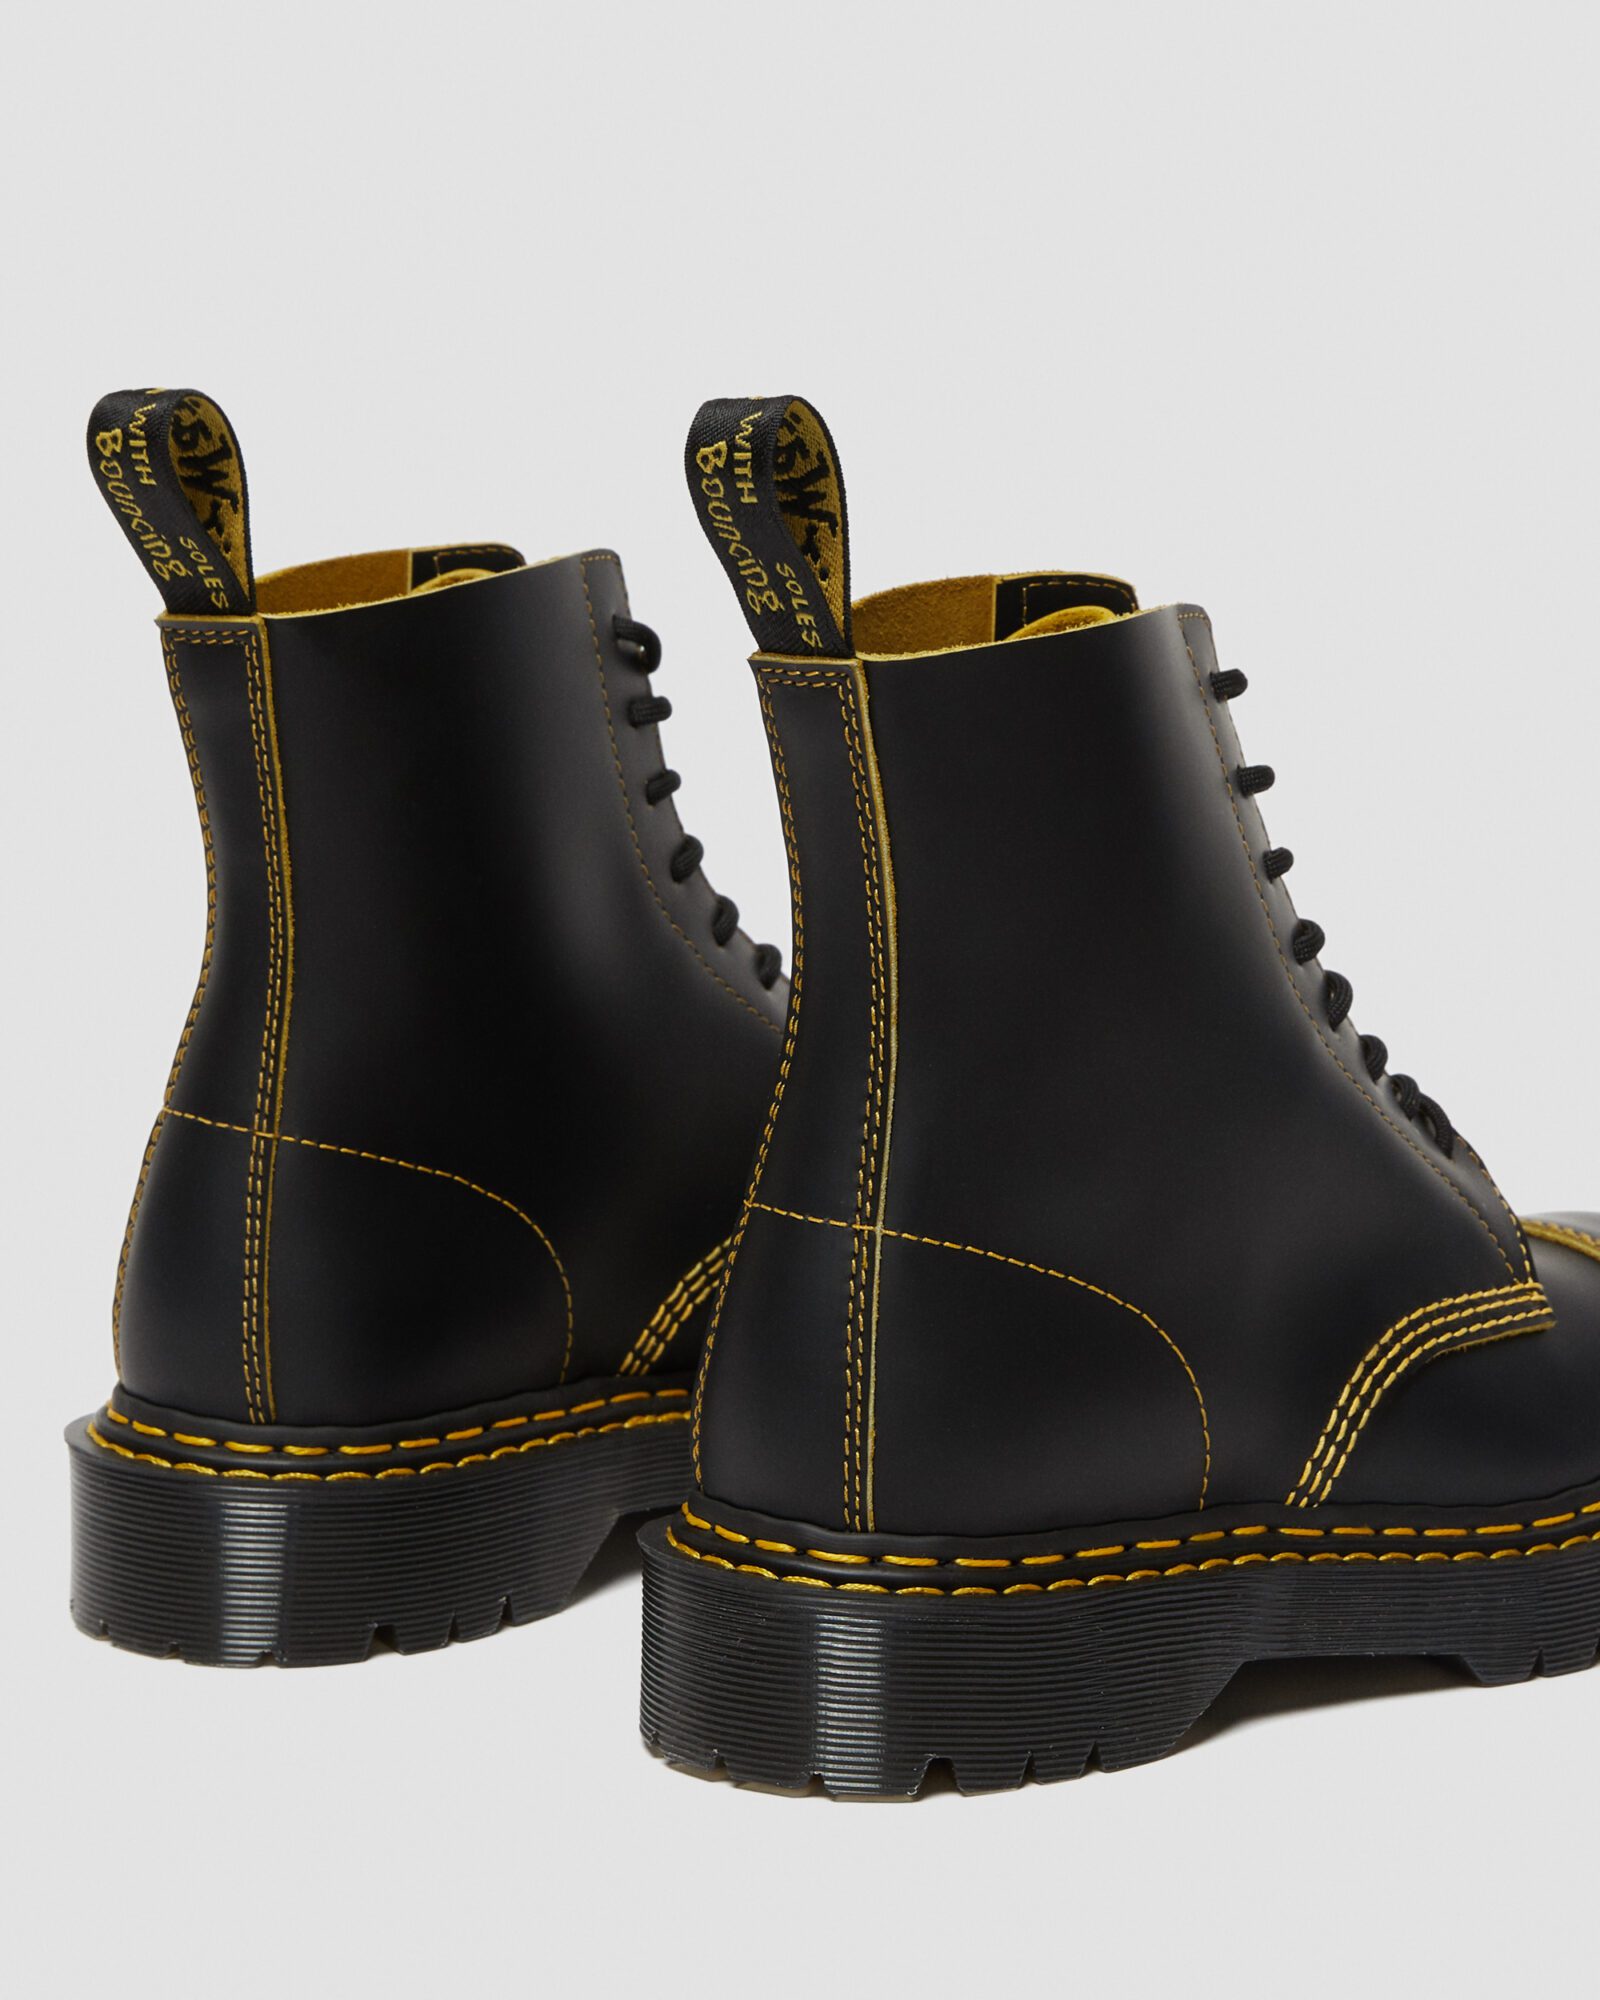 NEW LAUNCH: DR. MARTENS DOUBLE STITCH PACK - The Garnette Report